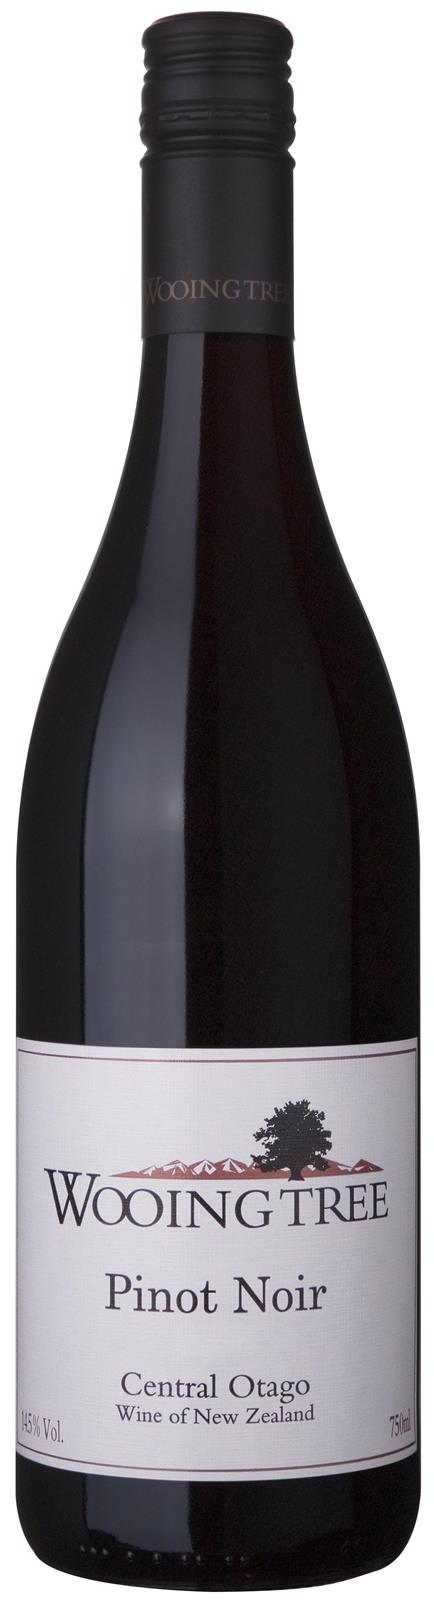 Wooing Tree Central Otago Pinot Noir 2017